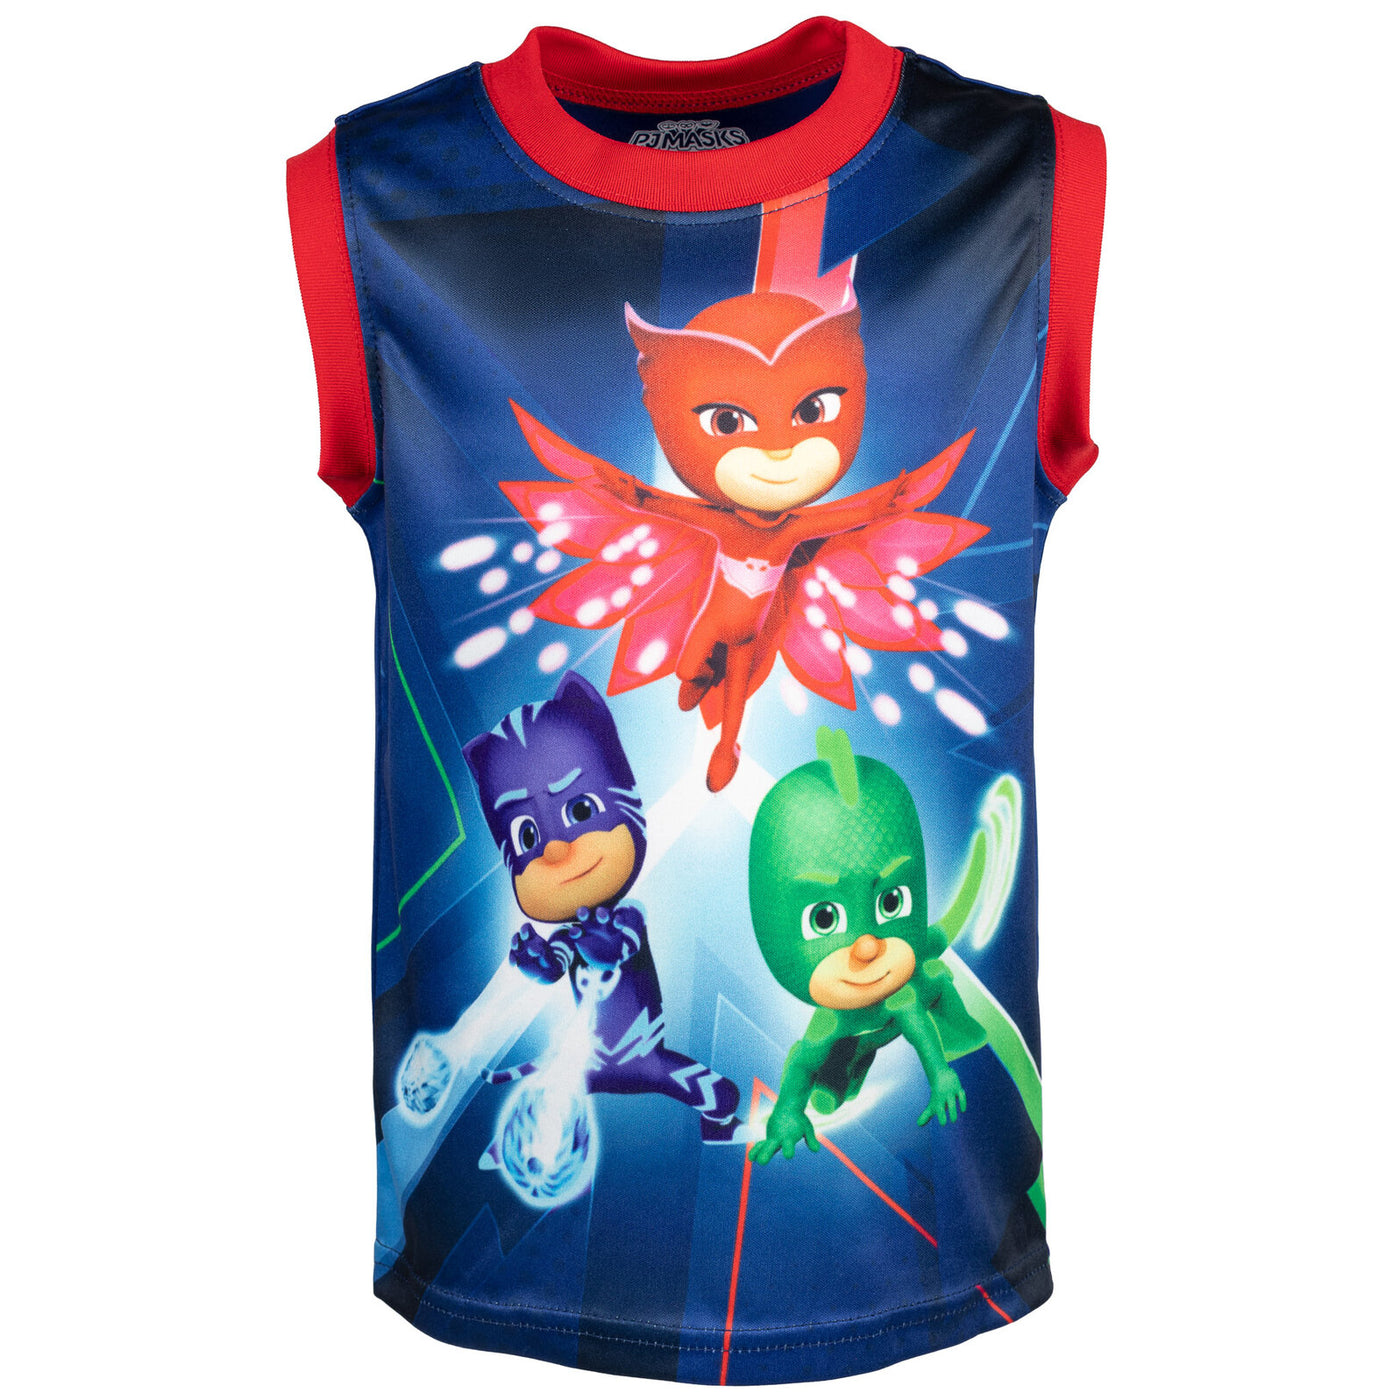 PJ Masks T-Shirt Tank Top and French Terry Shorts 3 Piece Outfit Set